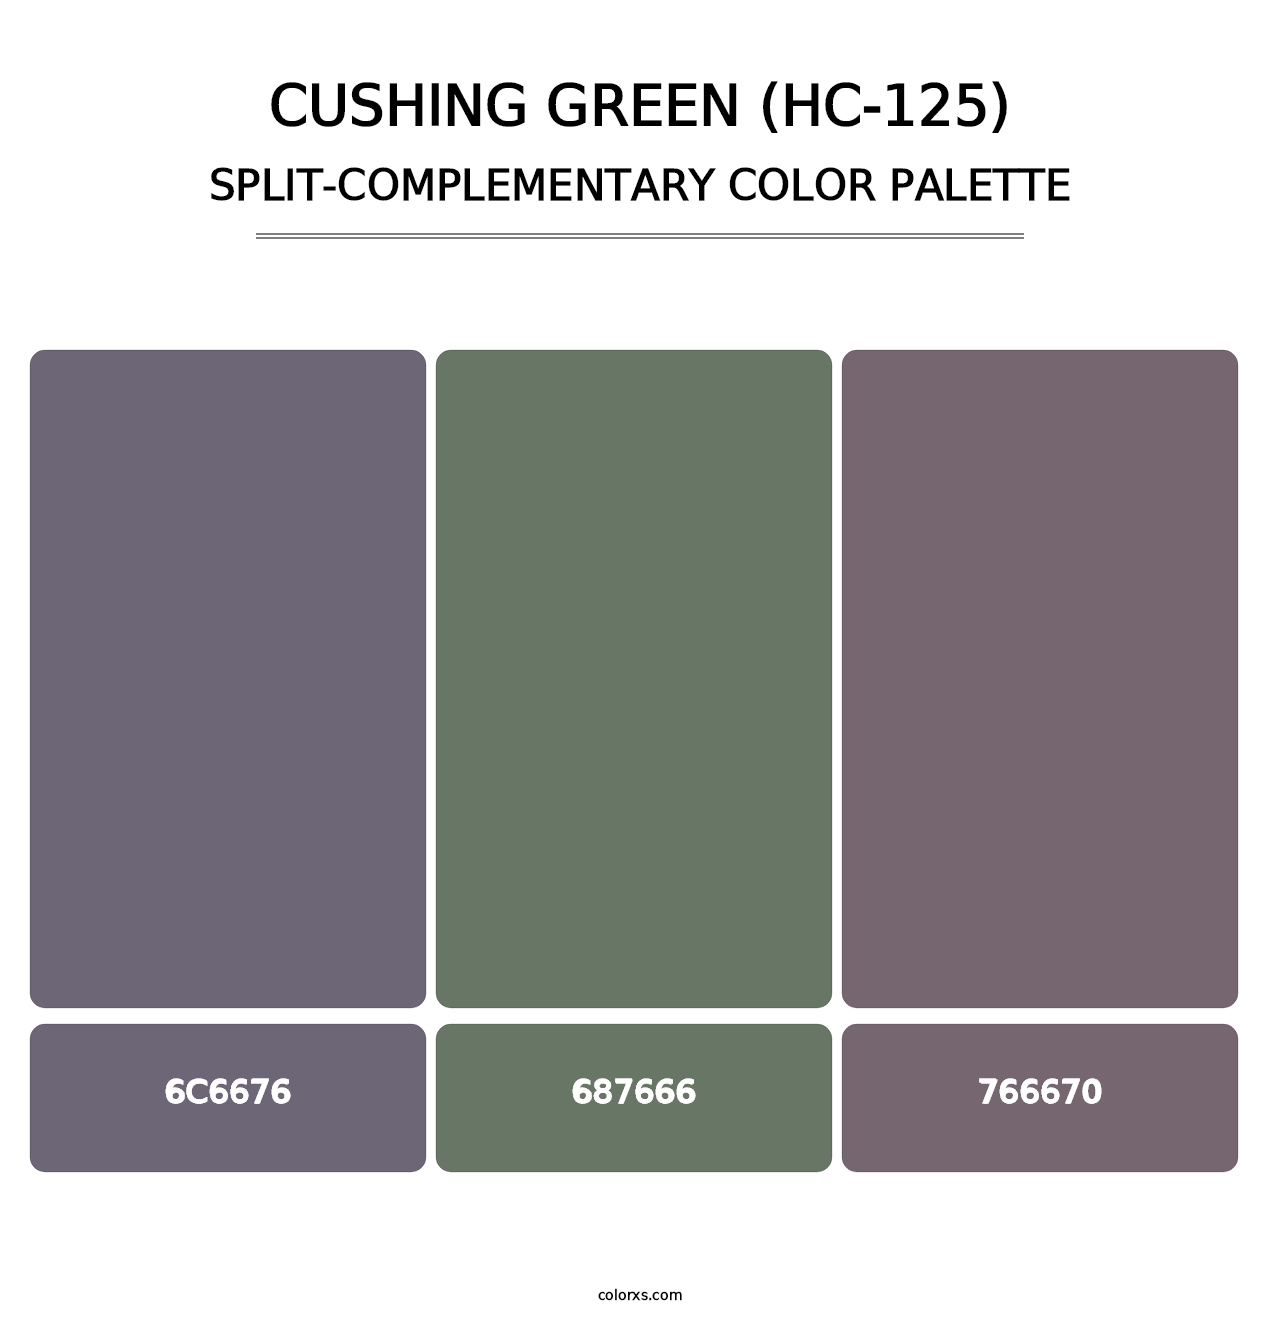 Cushing Green (HC-125) - Split-Complementary Color Palette